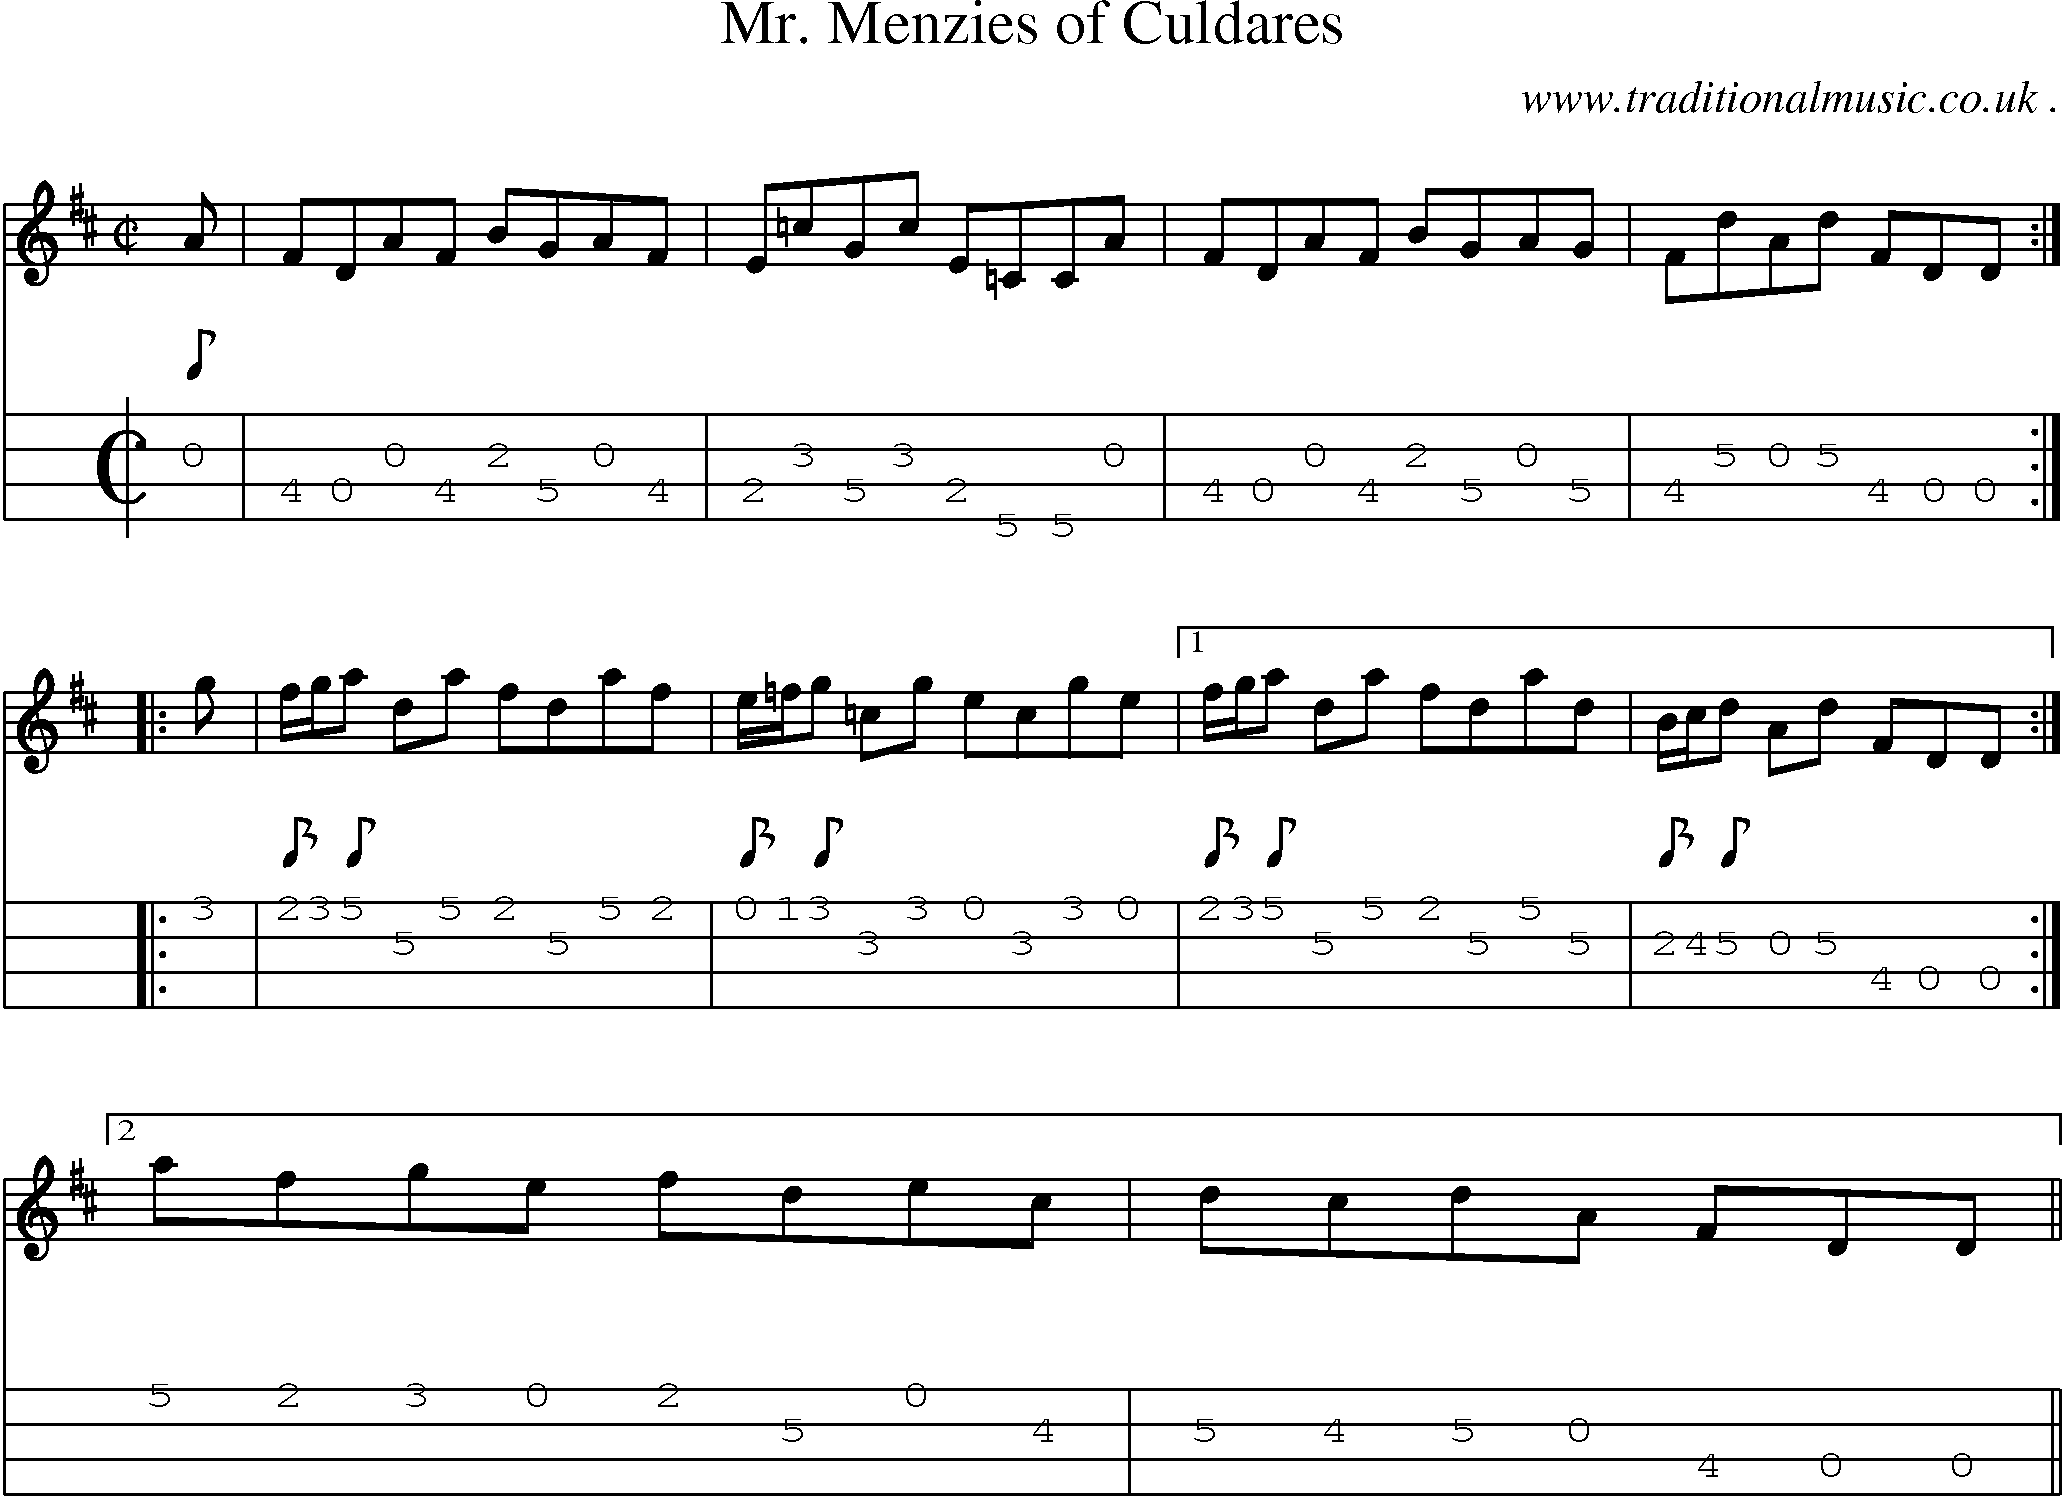 Sheet-music  score, Chords and Mandolin Tabs for Mr Menzies Of Culdares